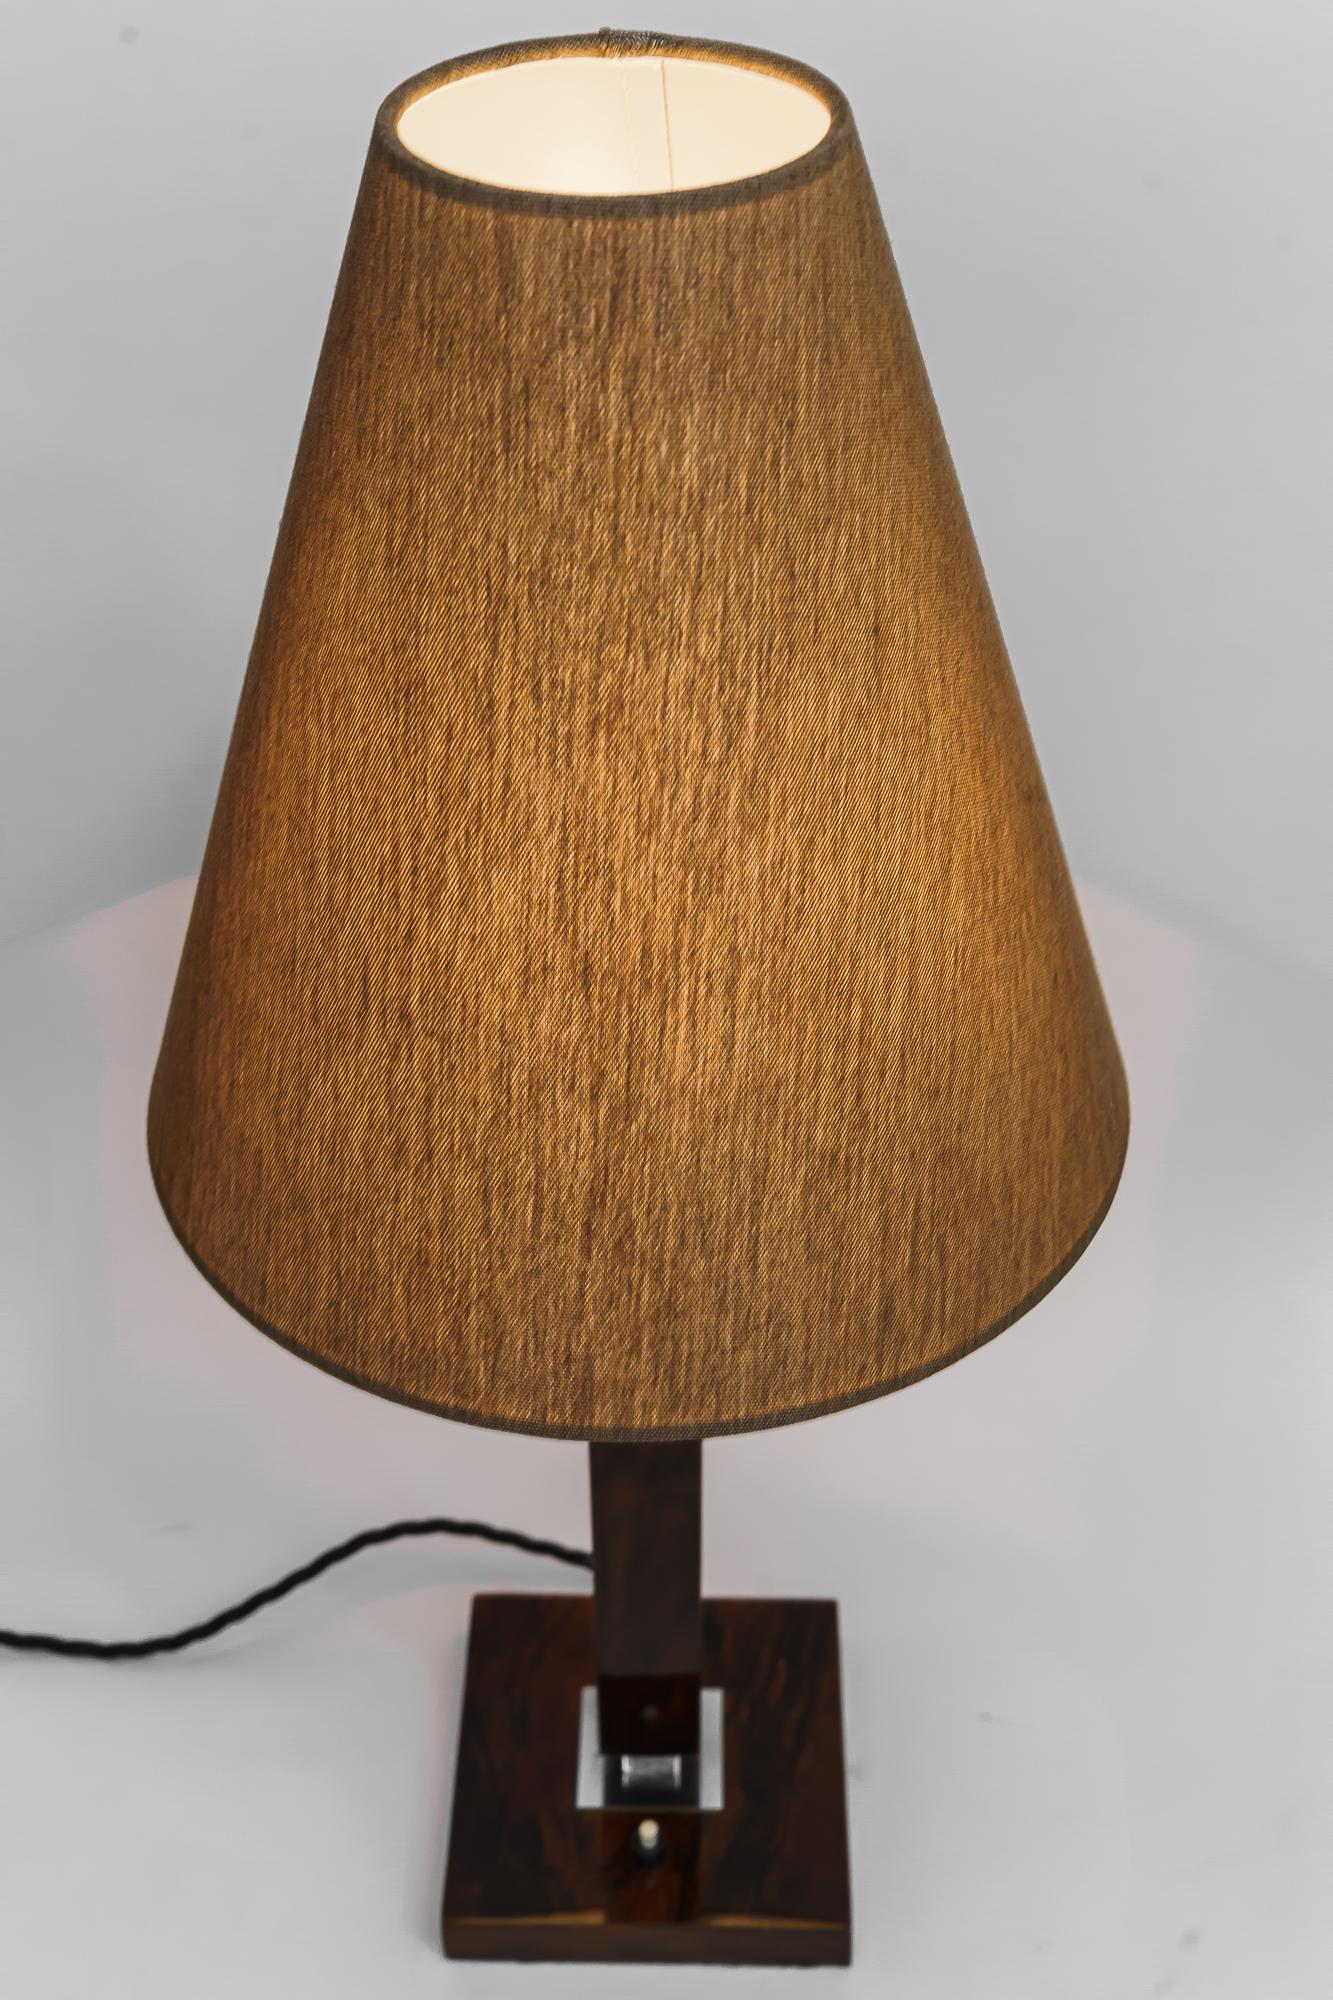 Art Deco Table Lamp Vienna Around 1920 Nut Wood and Fabric Shade For Sale 5